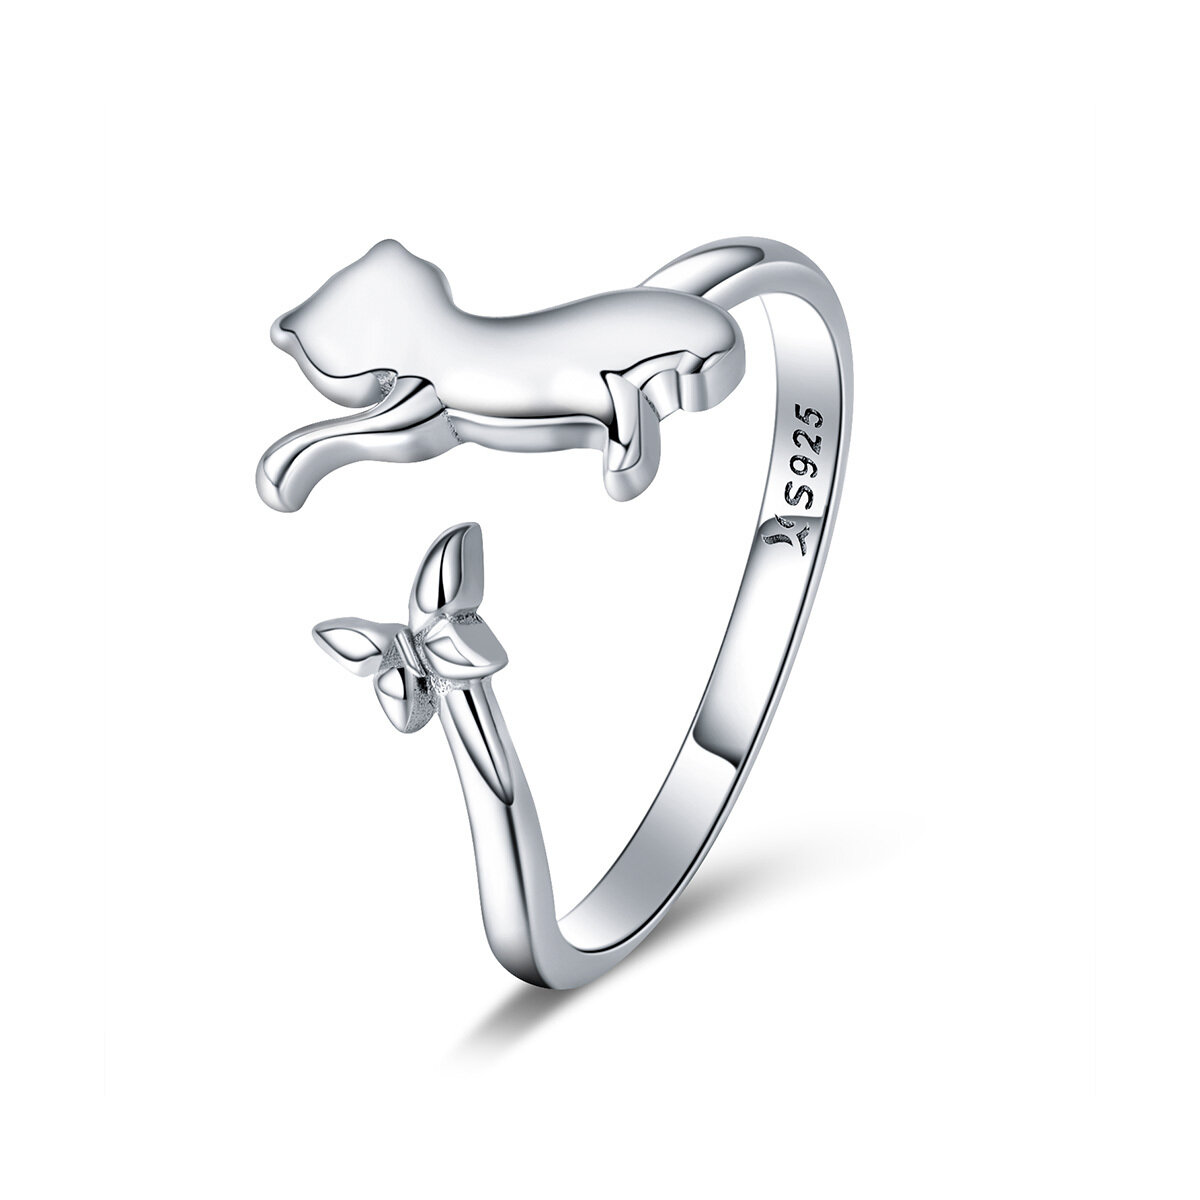 GemKing SCR443 Cat's Companion Ring accompany of cat S925 Sterling Silver Ring